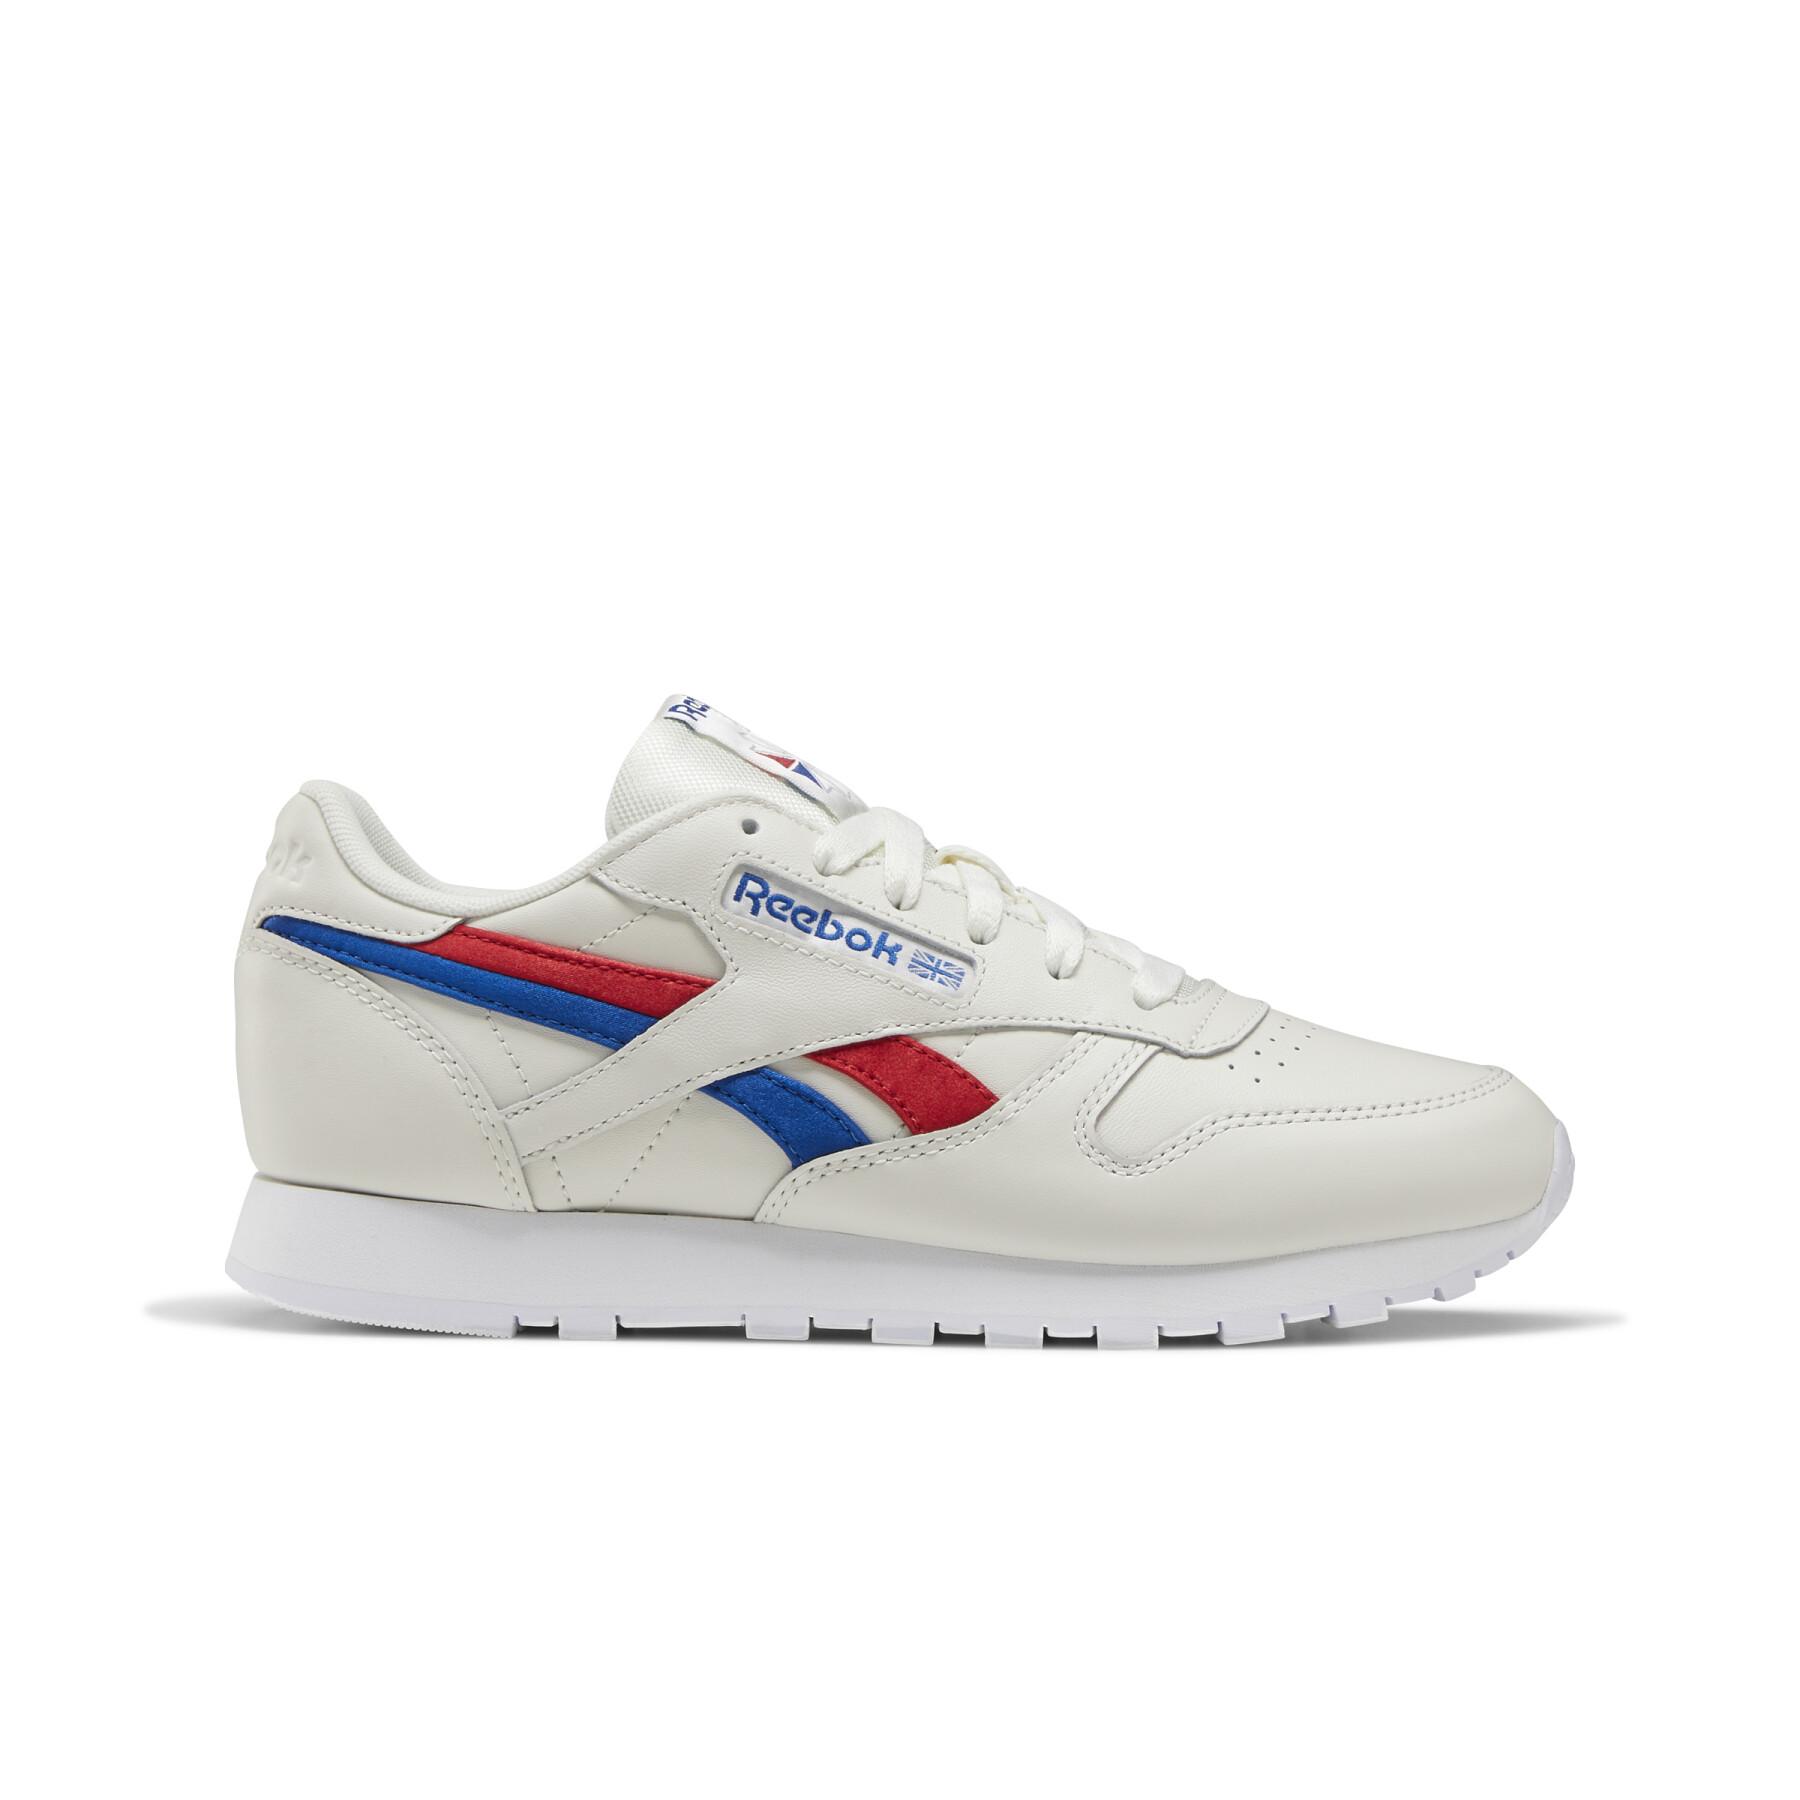 Baskets femme Reebok Classics Leather - Sneakers - Chaussures